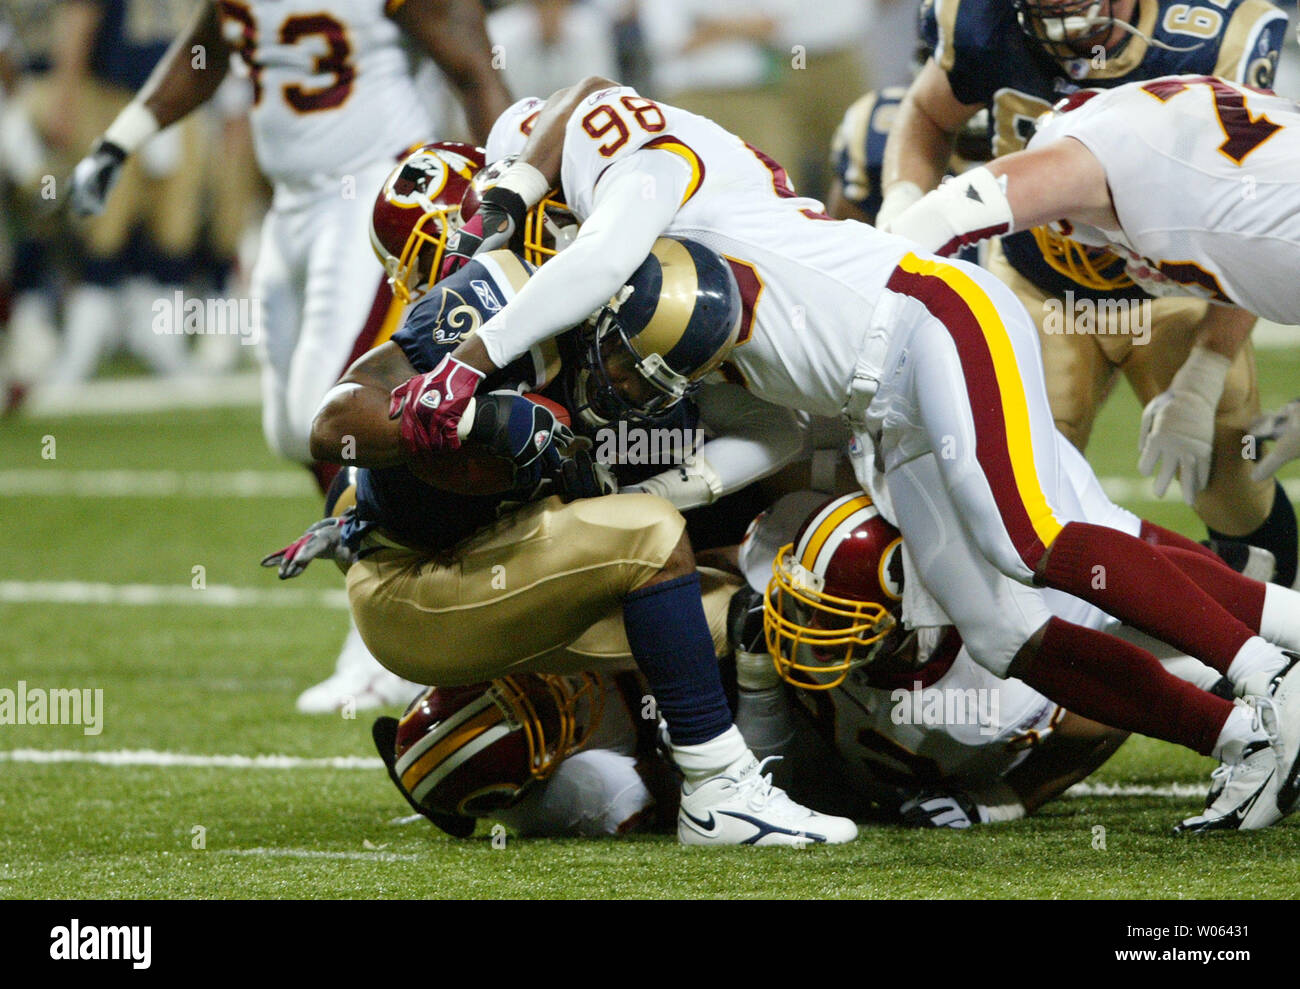 The Washington Redskins defense led by Lemar Marshall (98) pushes St. Louis Rams running back Steven Jackson back during the third quarter at the Edward Jones Dome in St. Louis on December 4, 2005. Washington held Jackson to 24 yards rushing, defeating St. Louis, 24-9.  (UPI Photo/Bill Greenblatt) Stock Photo